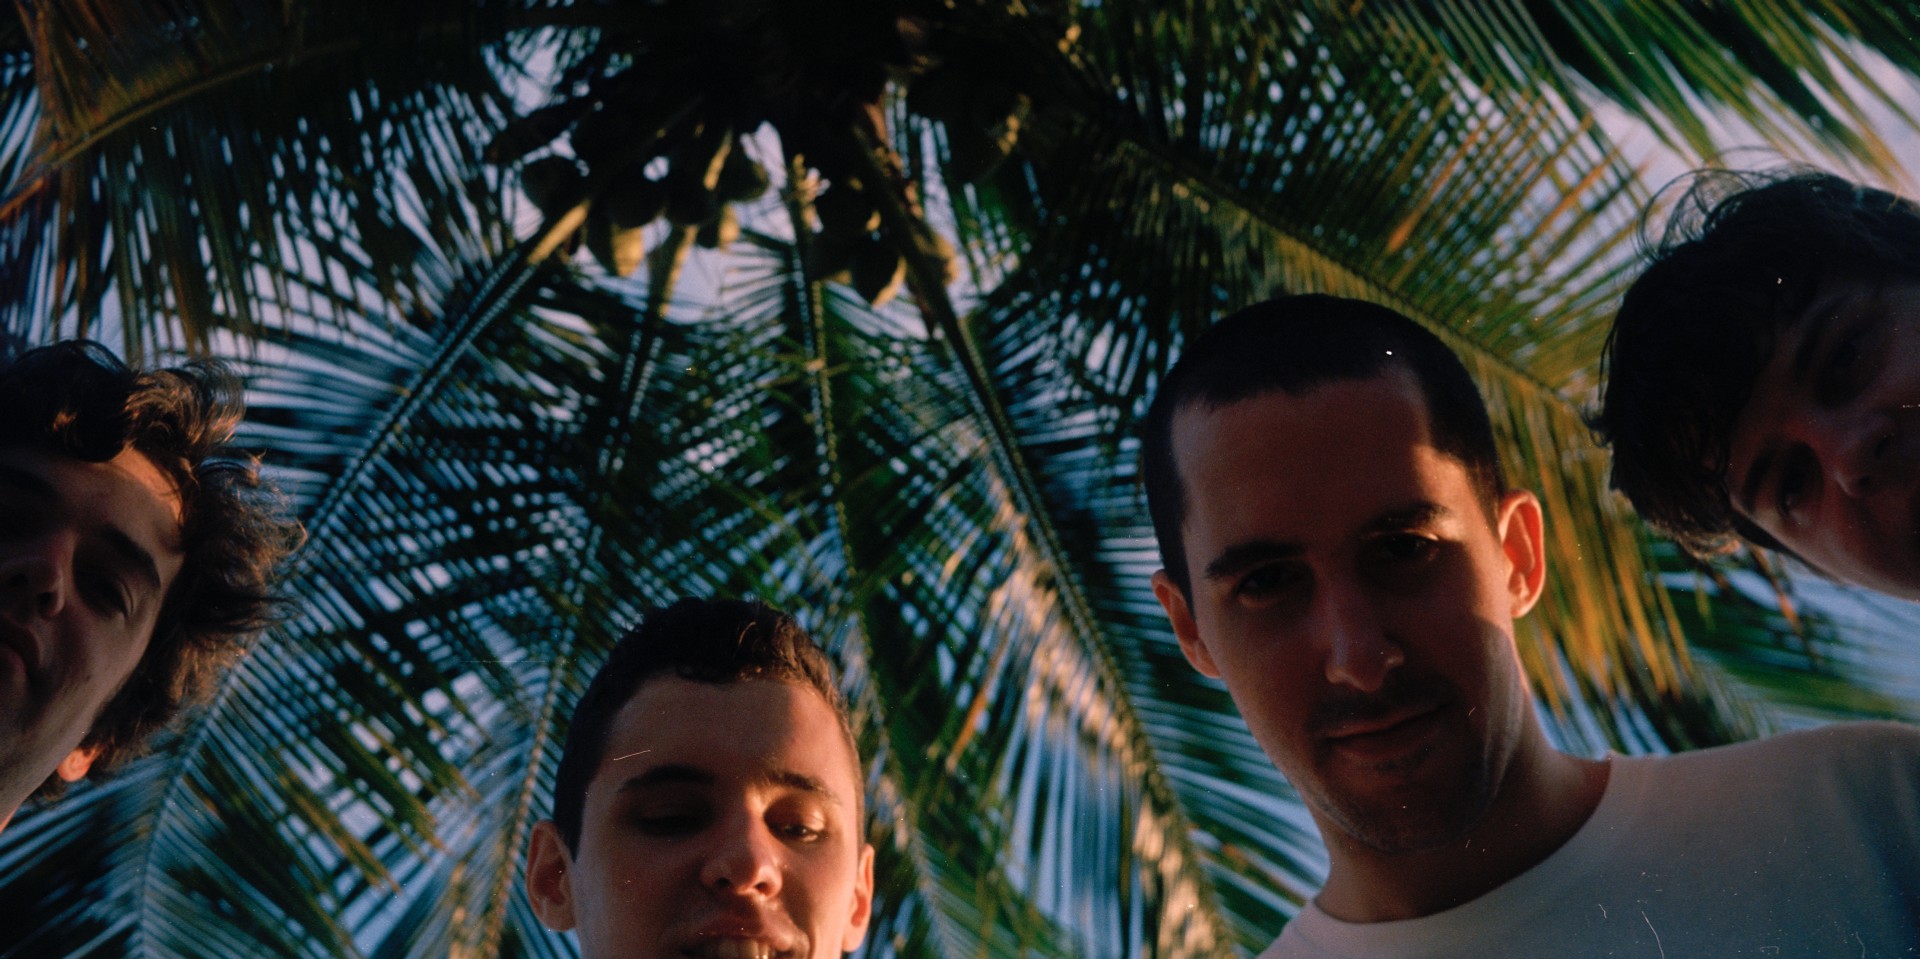 "Improvising as a band has always been a positive experience": An interview with BADBADNOTGOOD